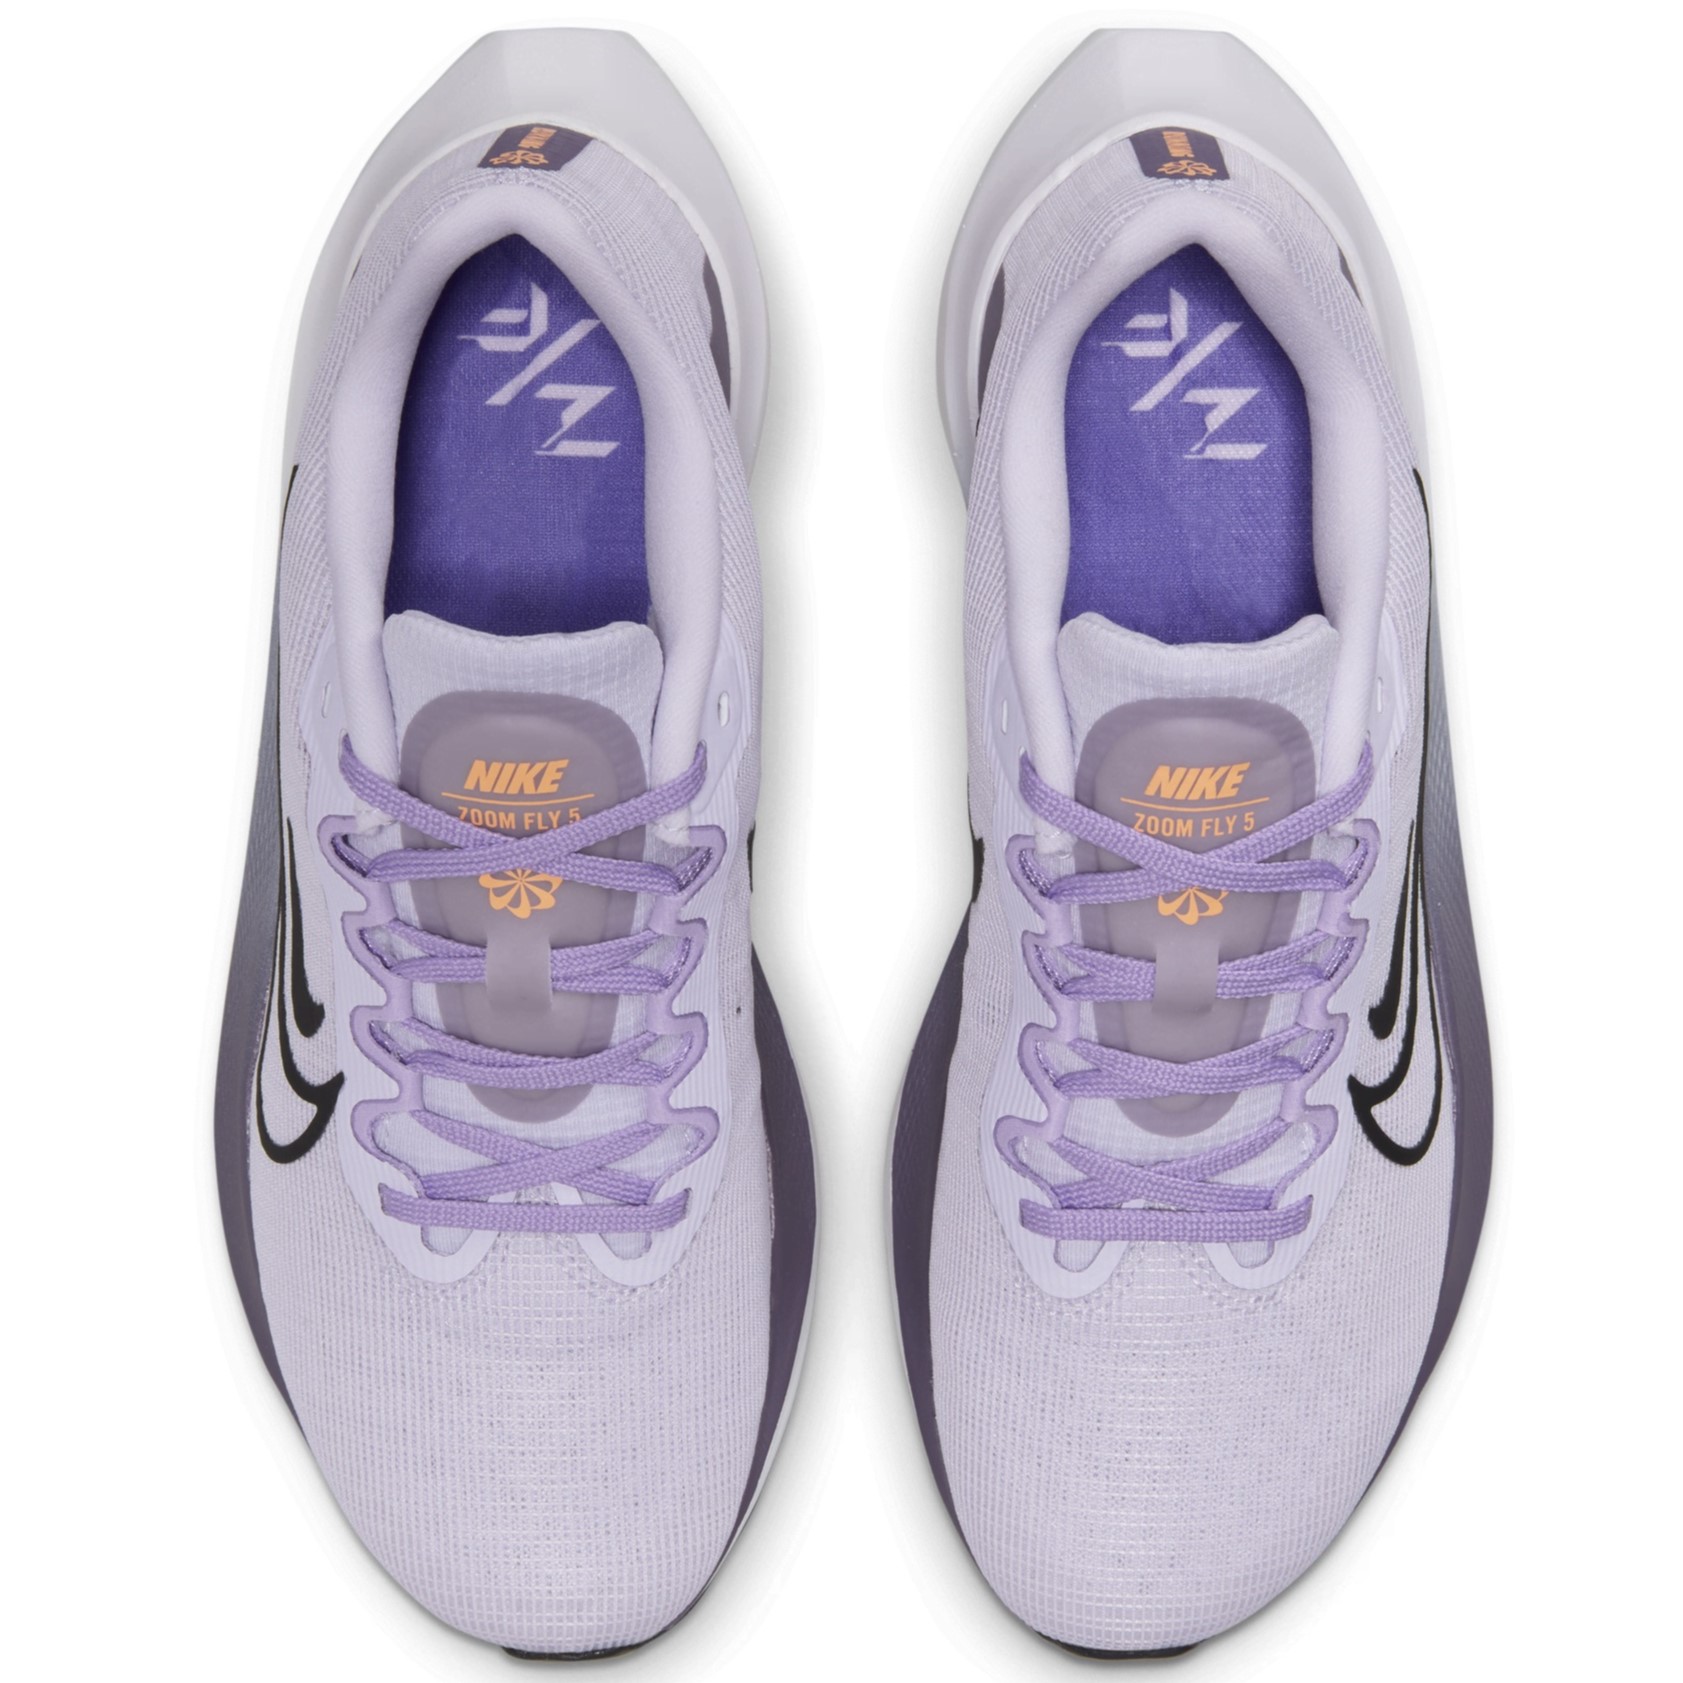 GIÀY NIKE NỮ ZOOM FLY 5 WOMEN ROAD RUNNING SHOES BARELY GRAPE DM8974-500 4